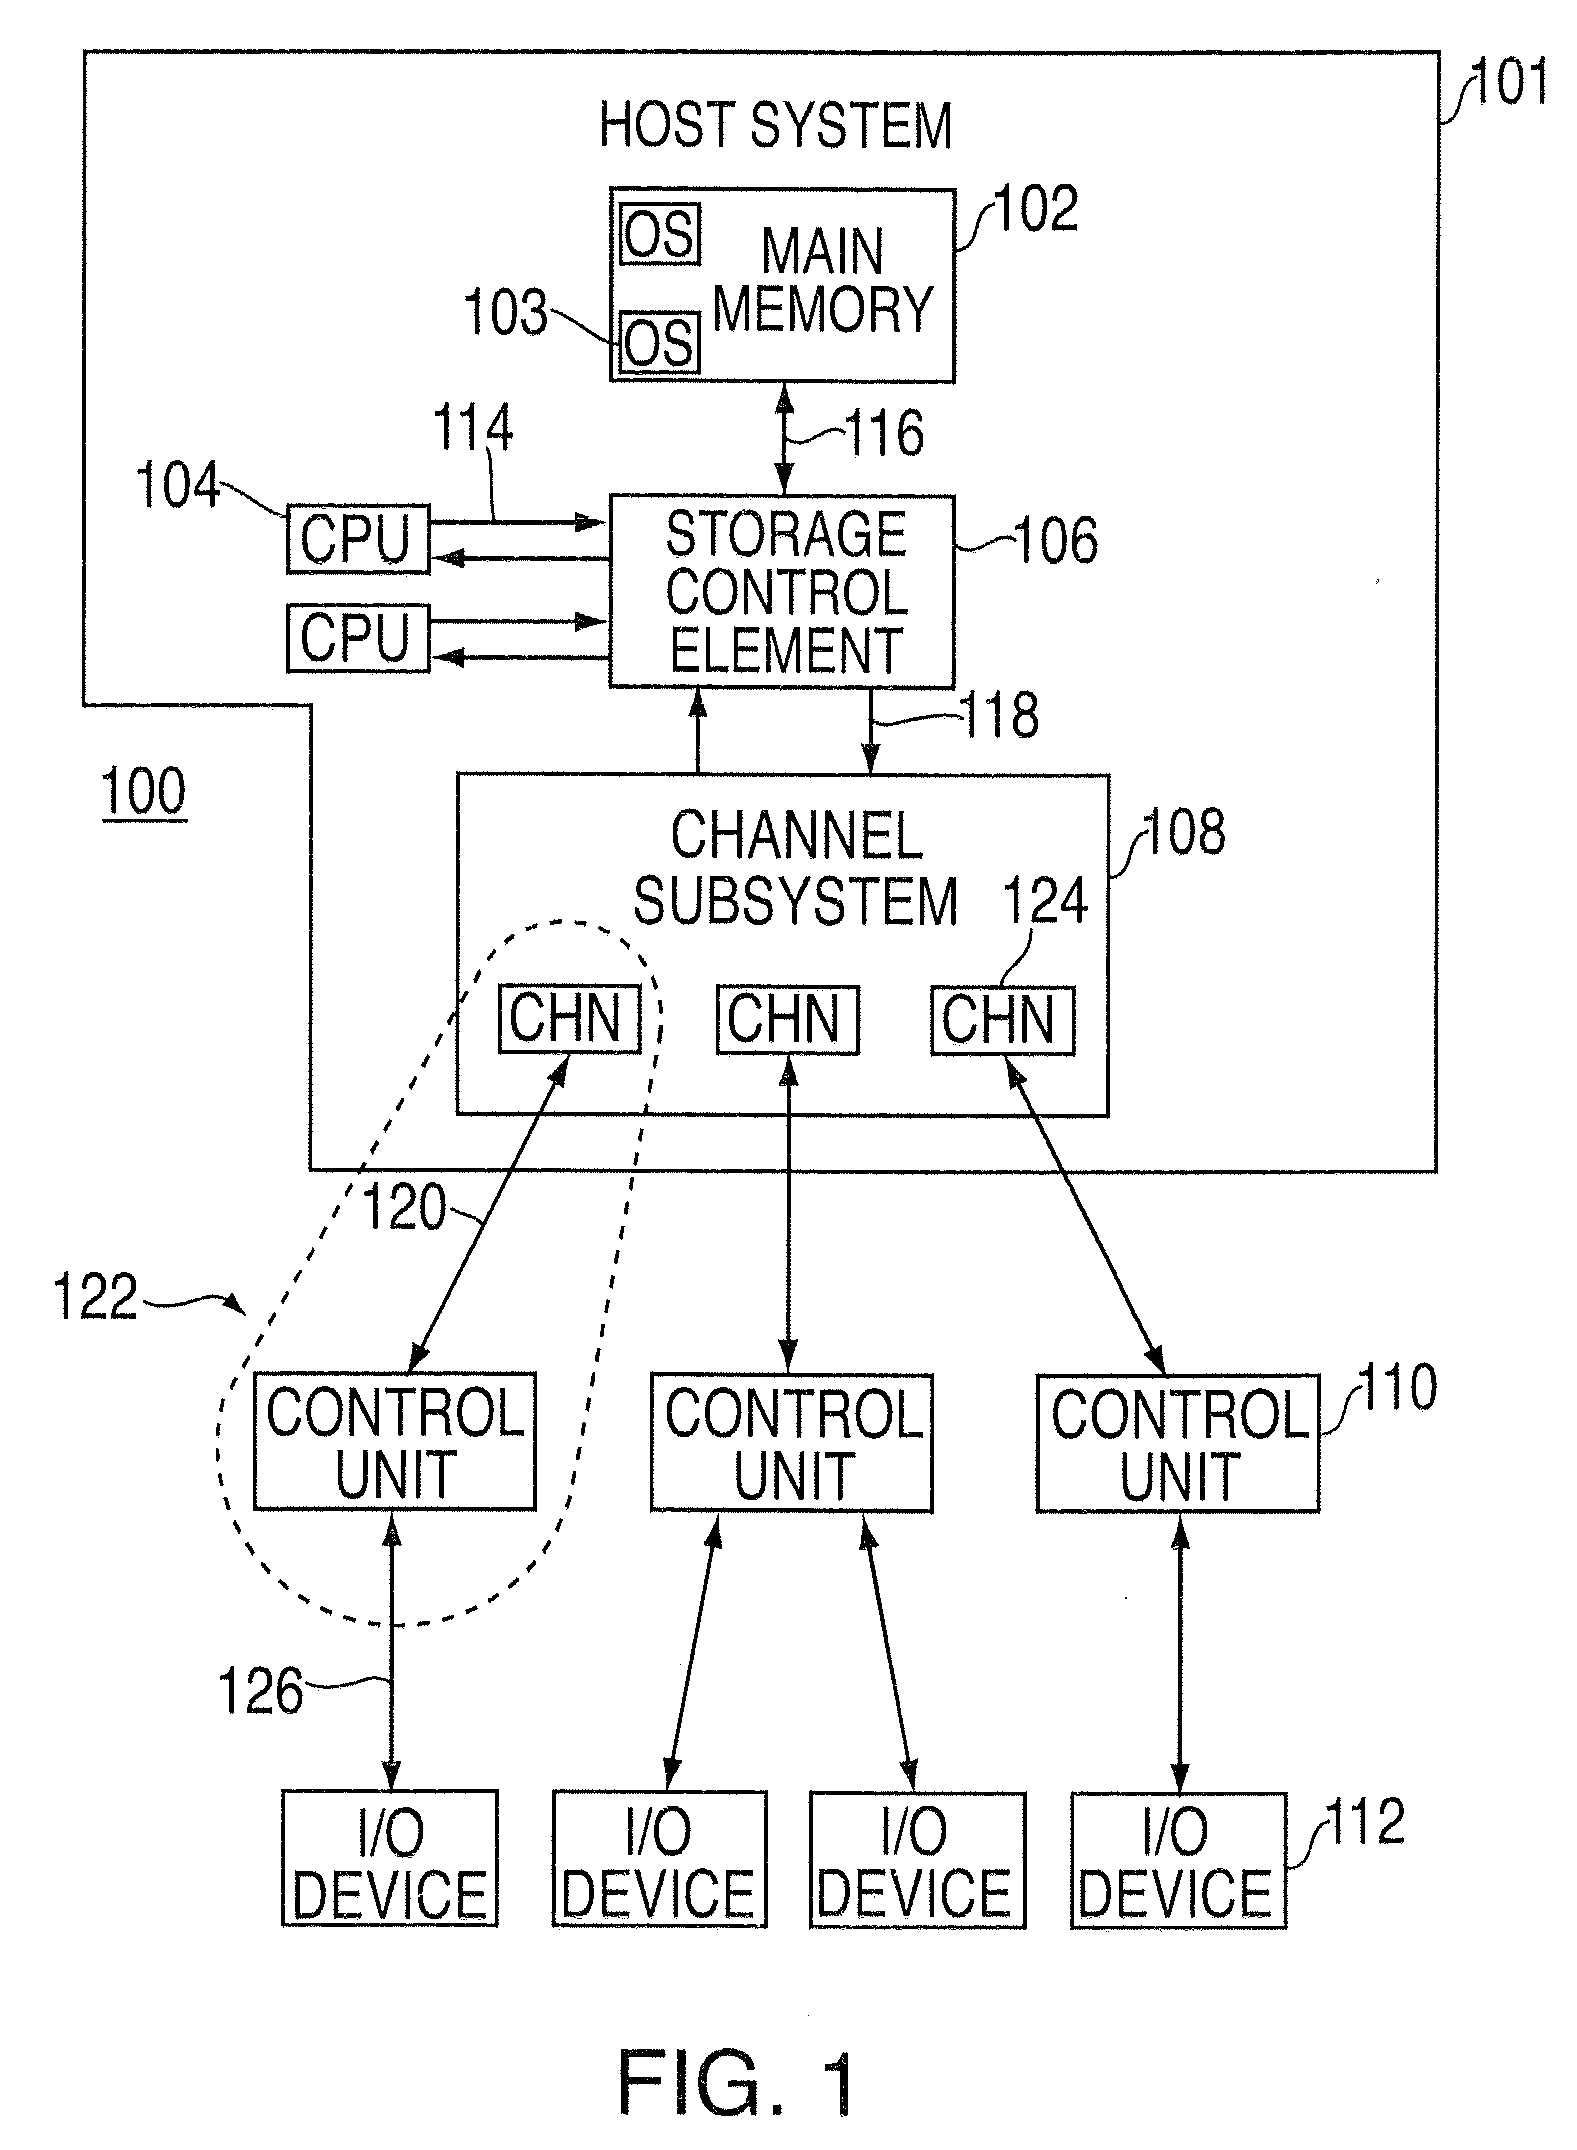 Processing of data to suspend operations in an input/output processing system